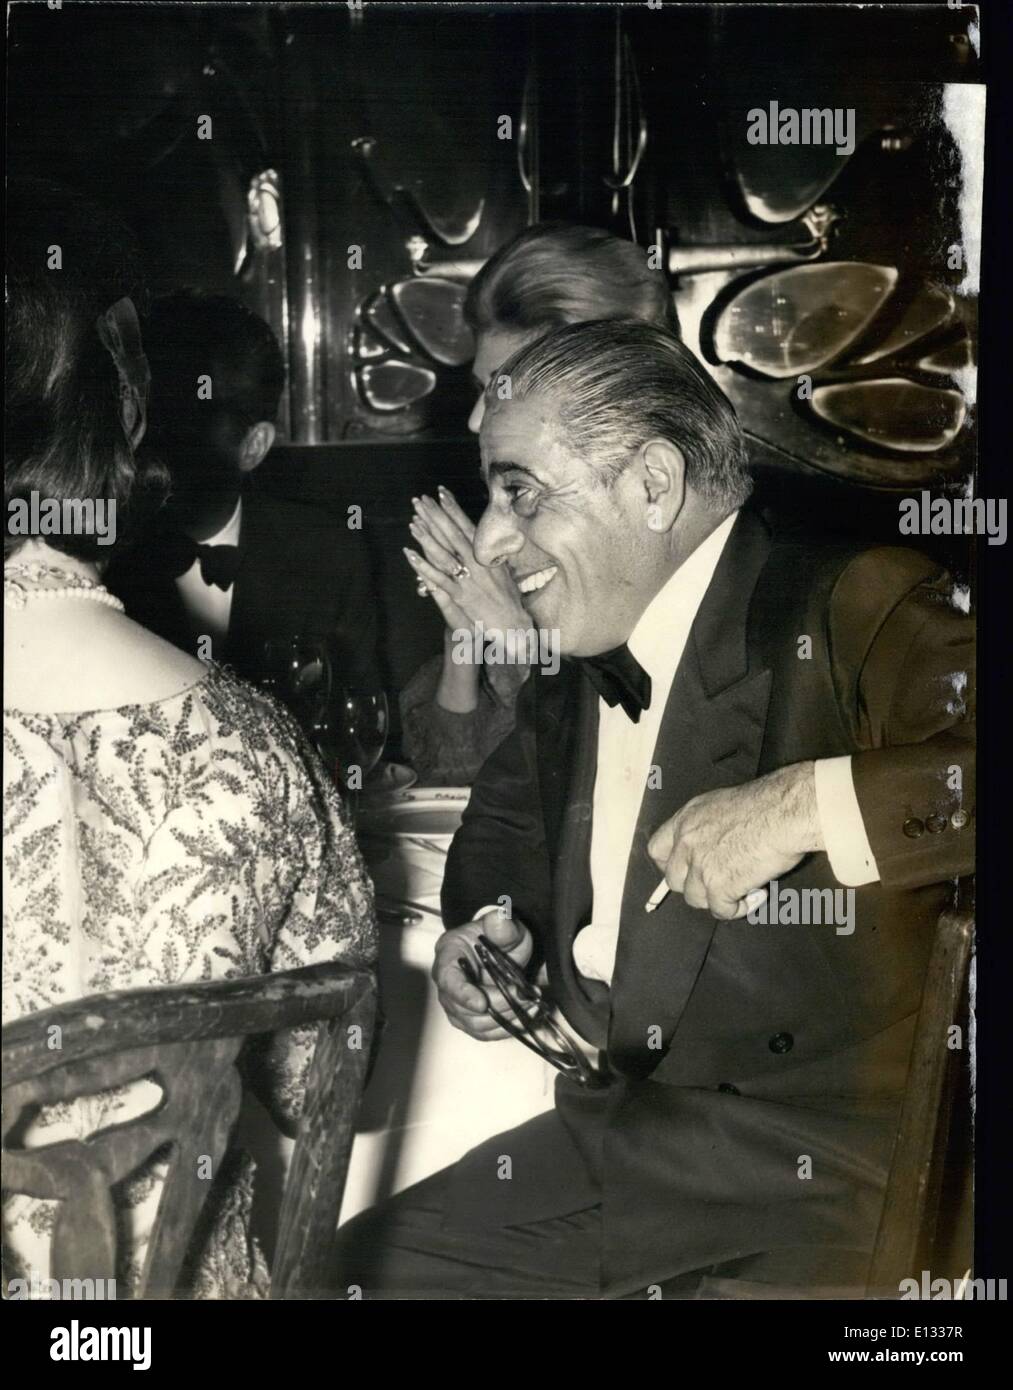 Feb. 26, 2012 - Onassis happy and smiling. OPS: The famous Greek ship owner Aristotle Onassis pictured in a happy mood during the gala dinner held at Maxim's last night. The occasion was the Paris premiere of Anthony Quinn's new film Zorba the Greek . Next to Onassis with back to the camera is Maria la Callas. Stock Photo